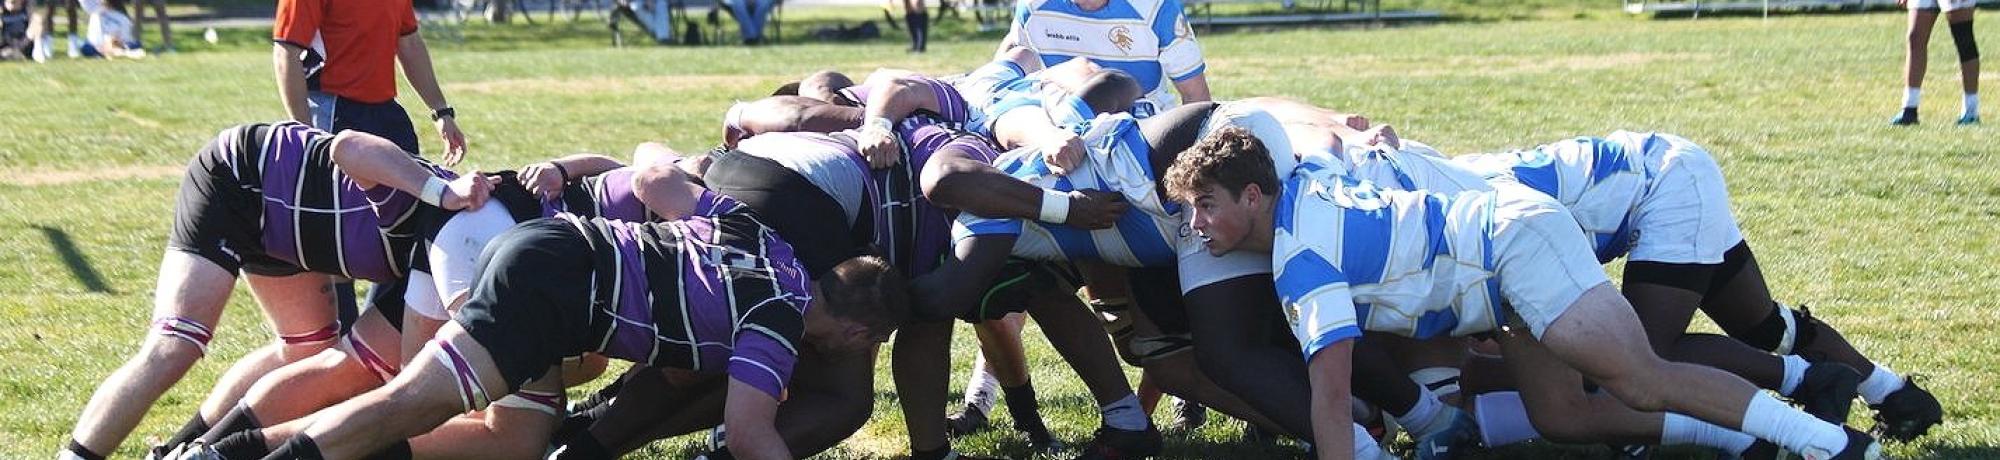 Image of two rugby teams in a scrum on a UC Davis playing field.